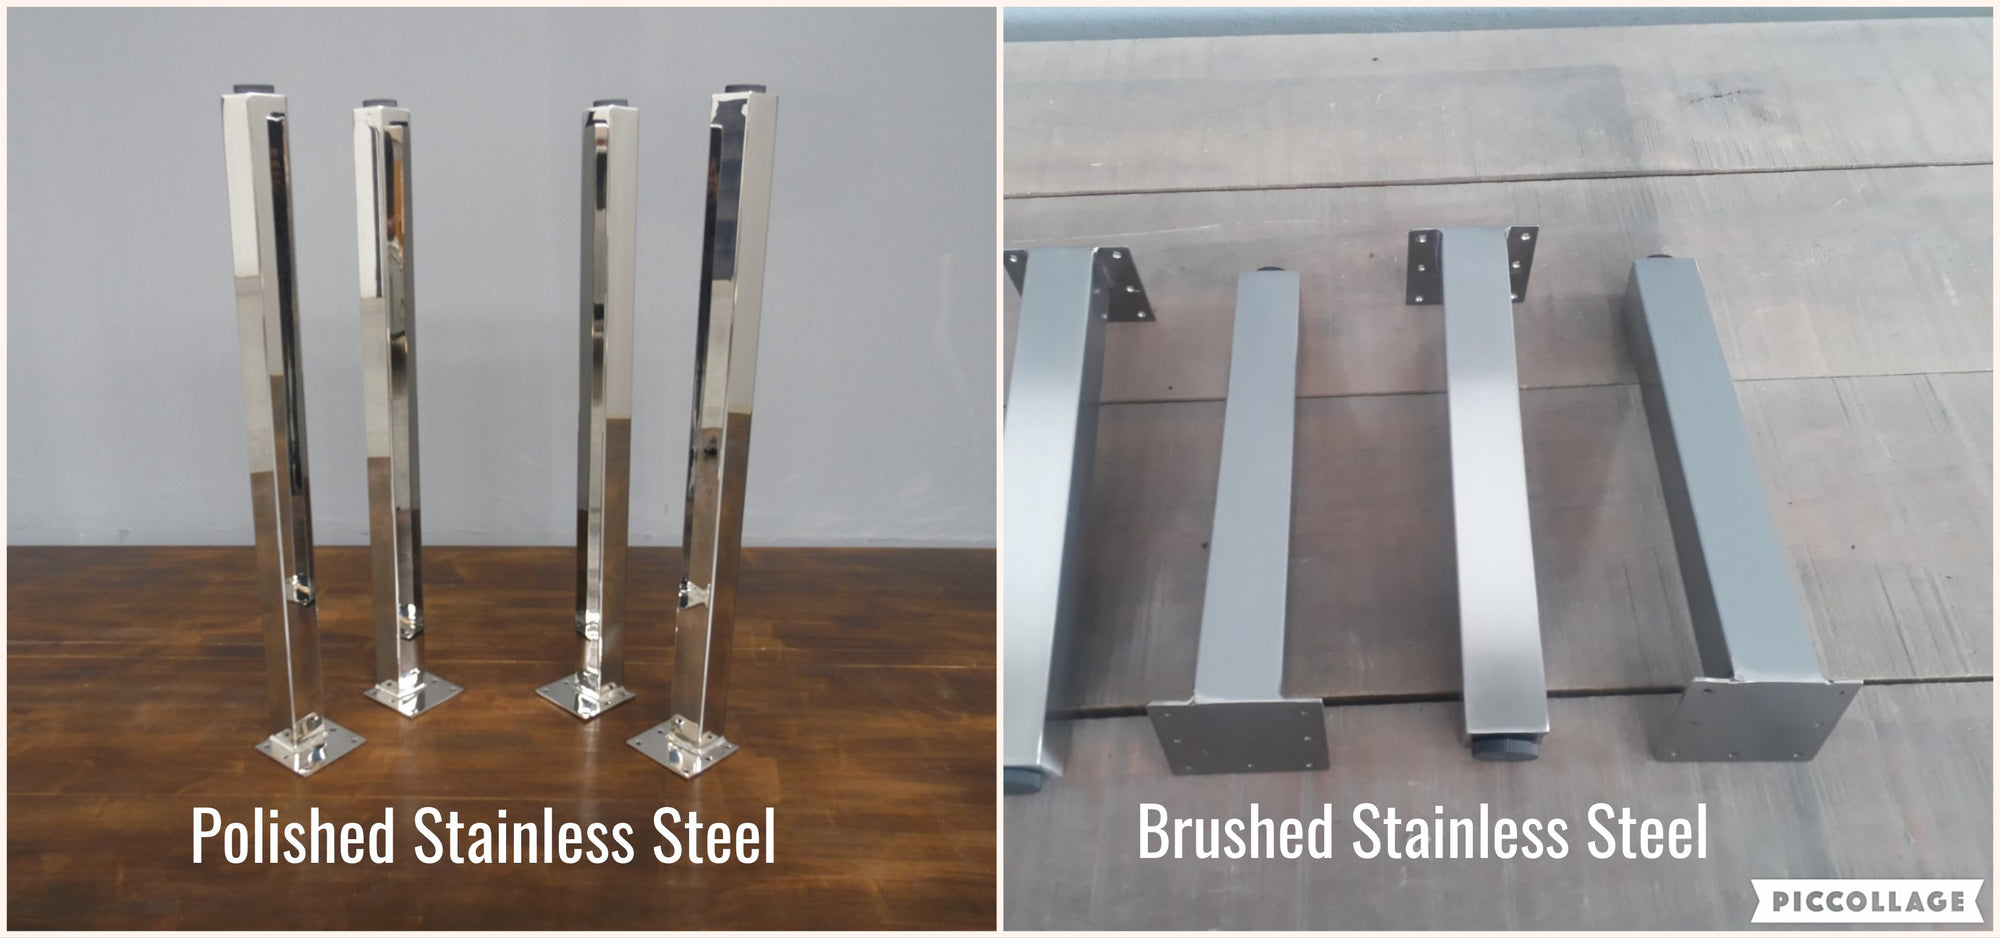 Polished brushed Stainless Steel Table Legs